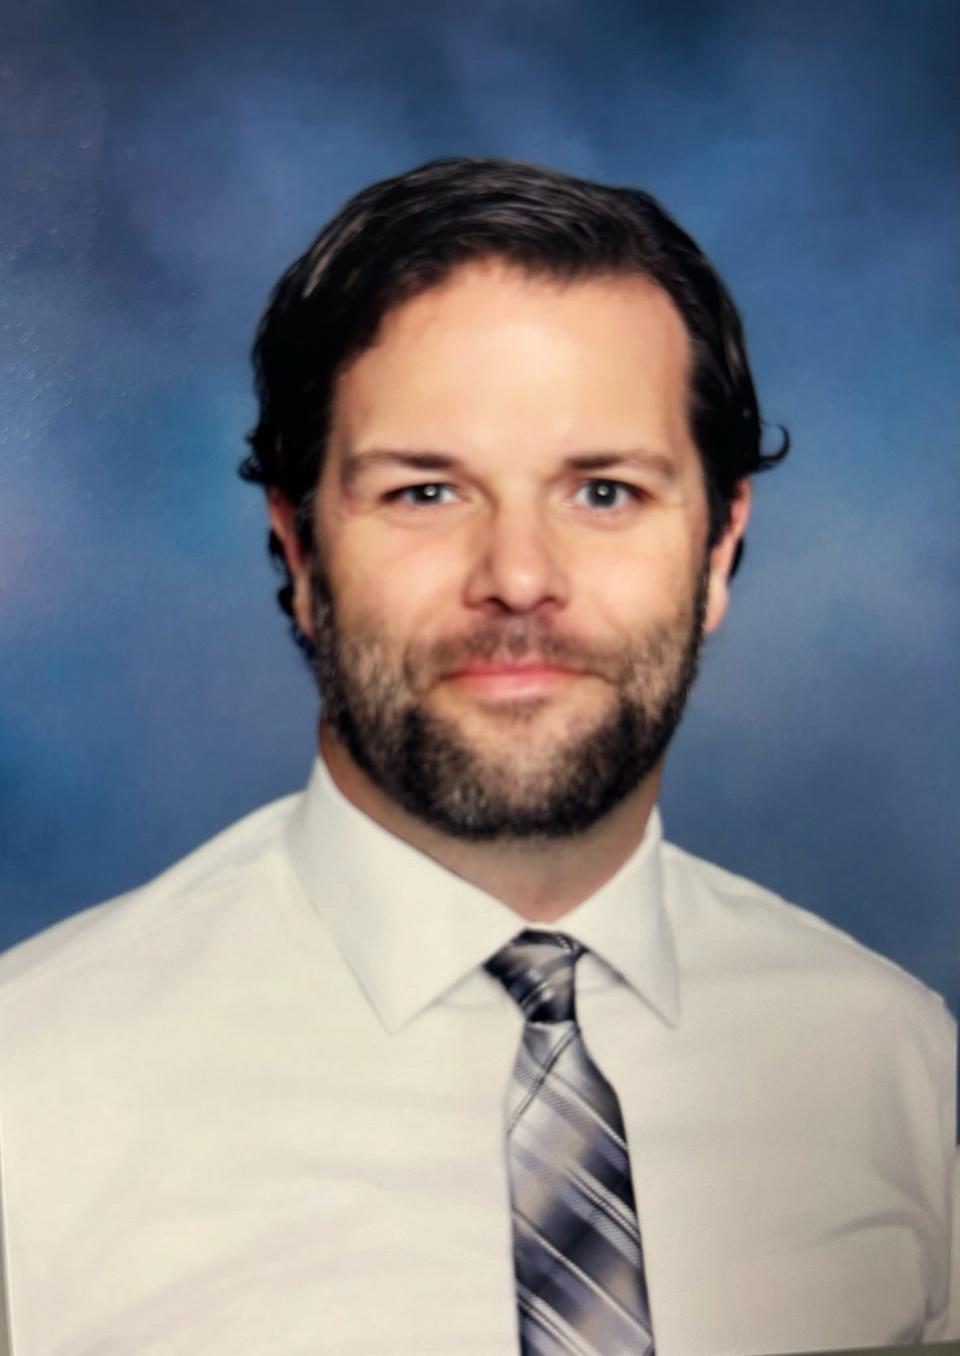 Clayton Cloud is the new principal at Canopy Oaks Elementary School.